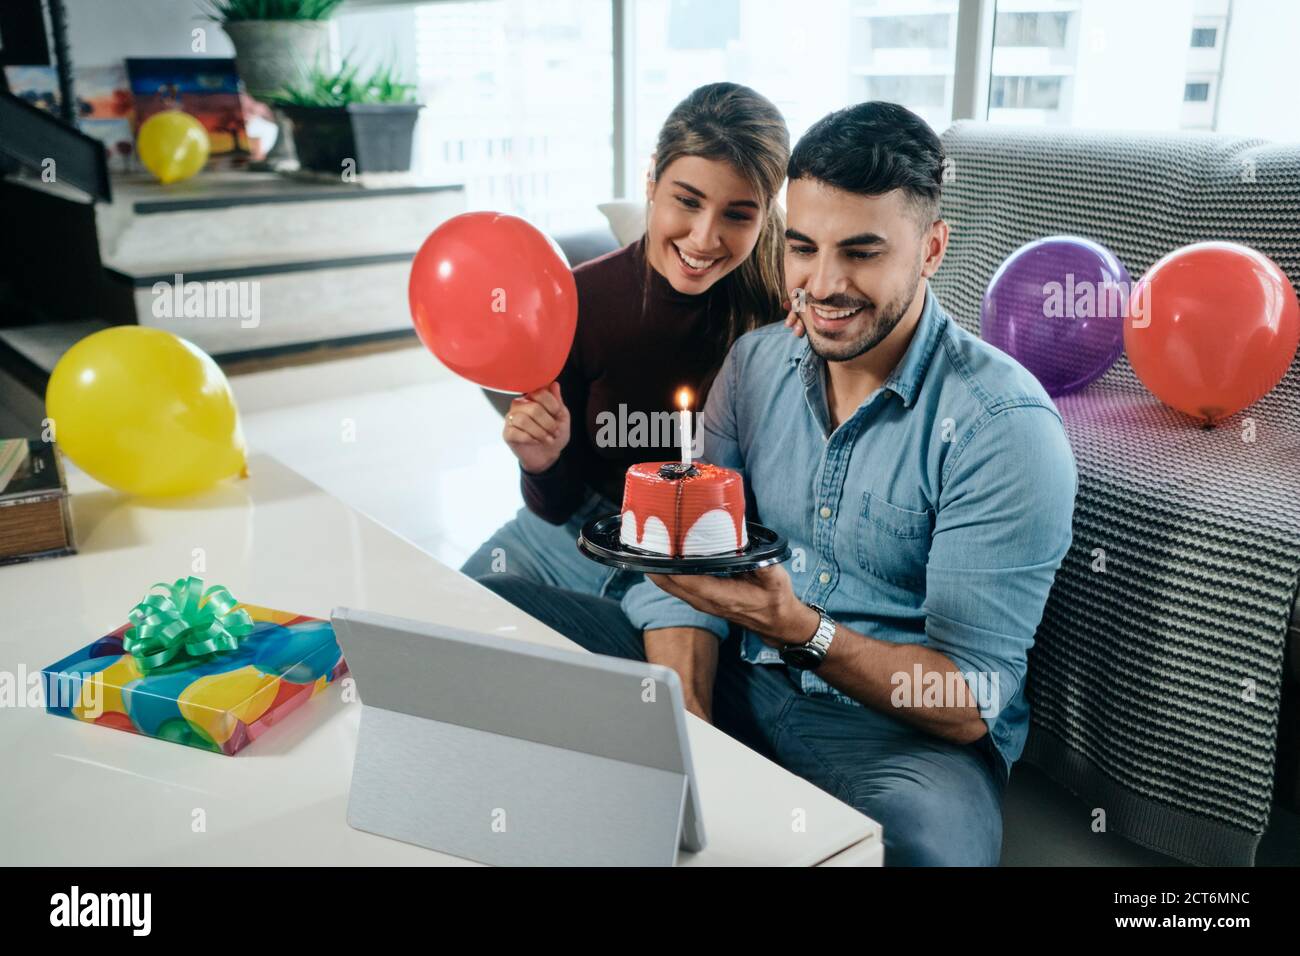 Happy People Celebrating Birthday Party Doing Video Call Stock Photo